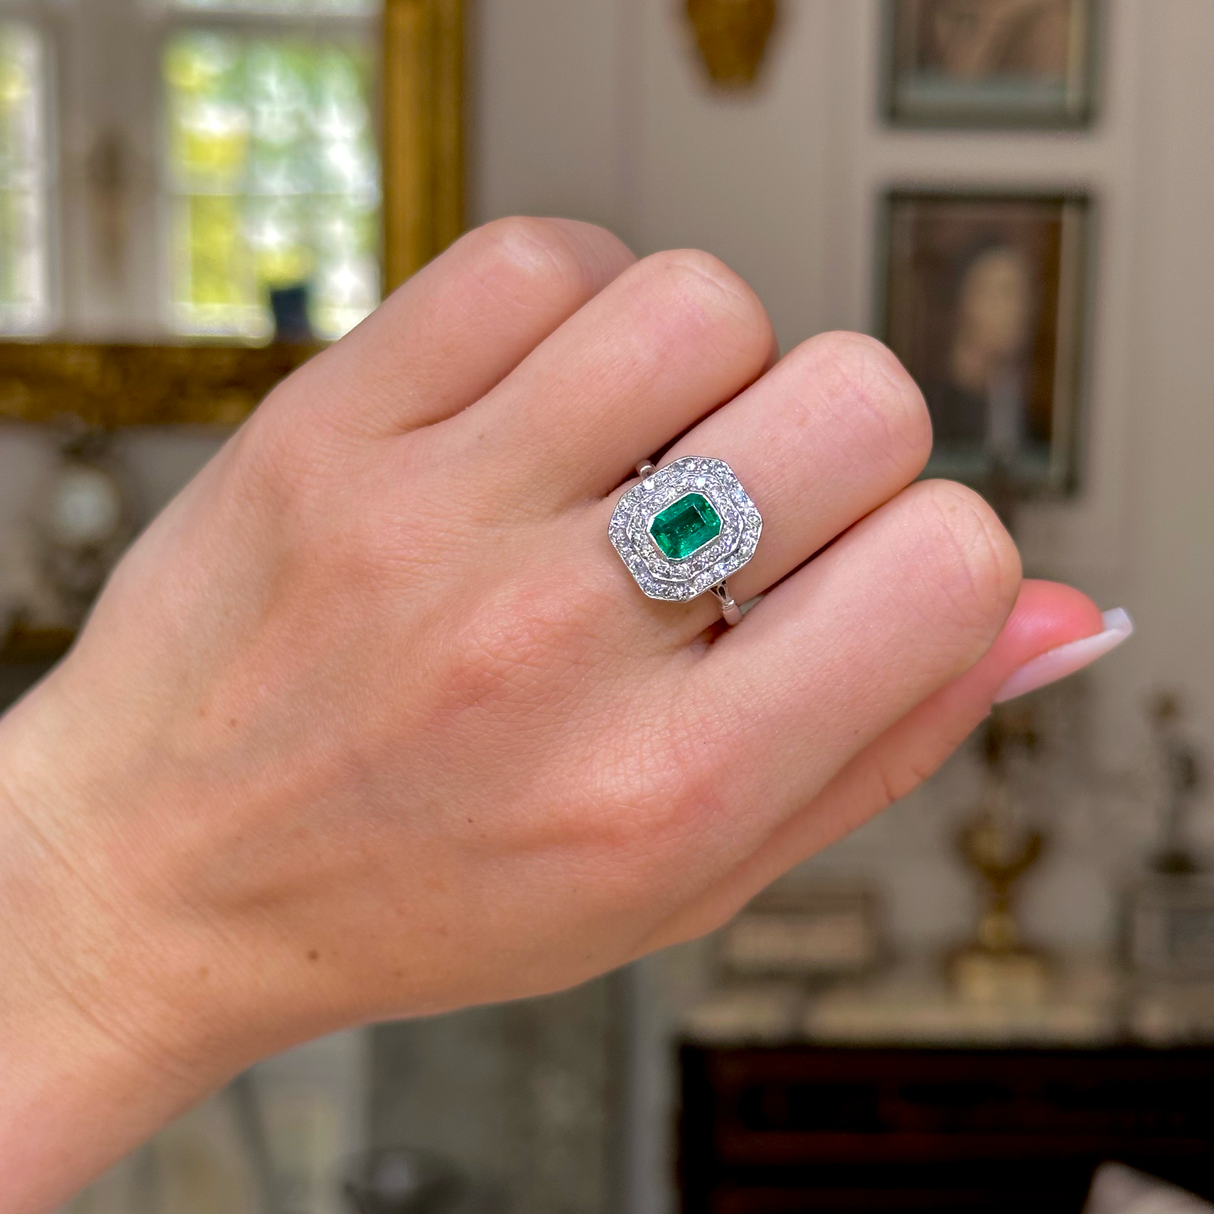 Vintage emerald and diamond cluster ring, worn on hand.